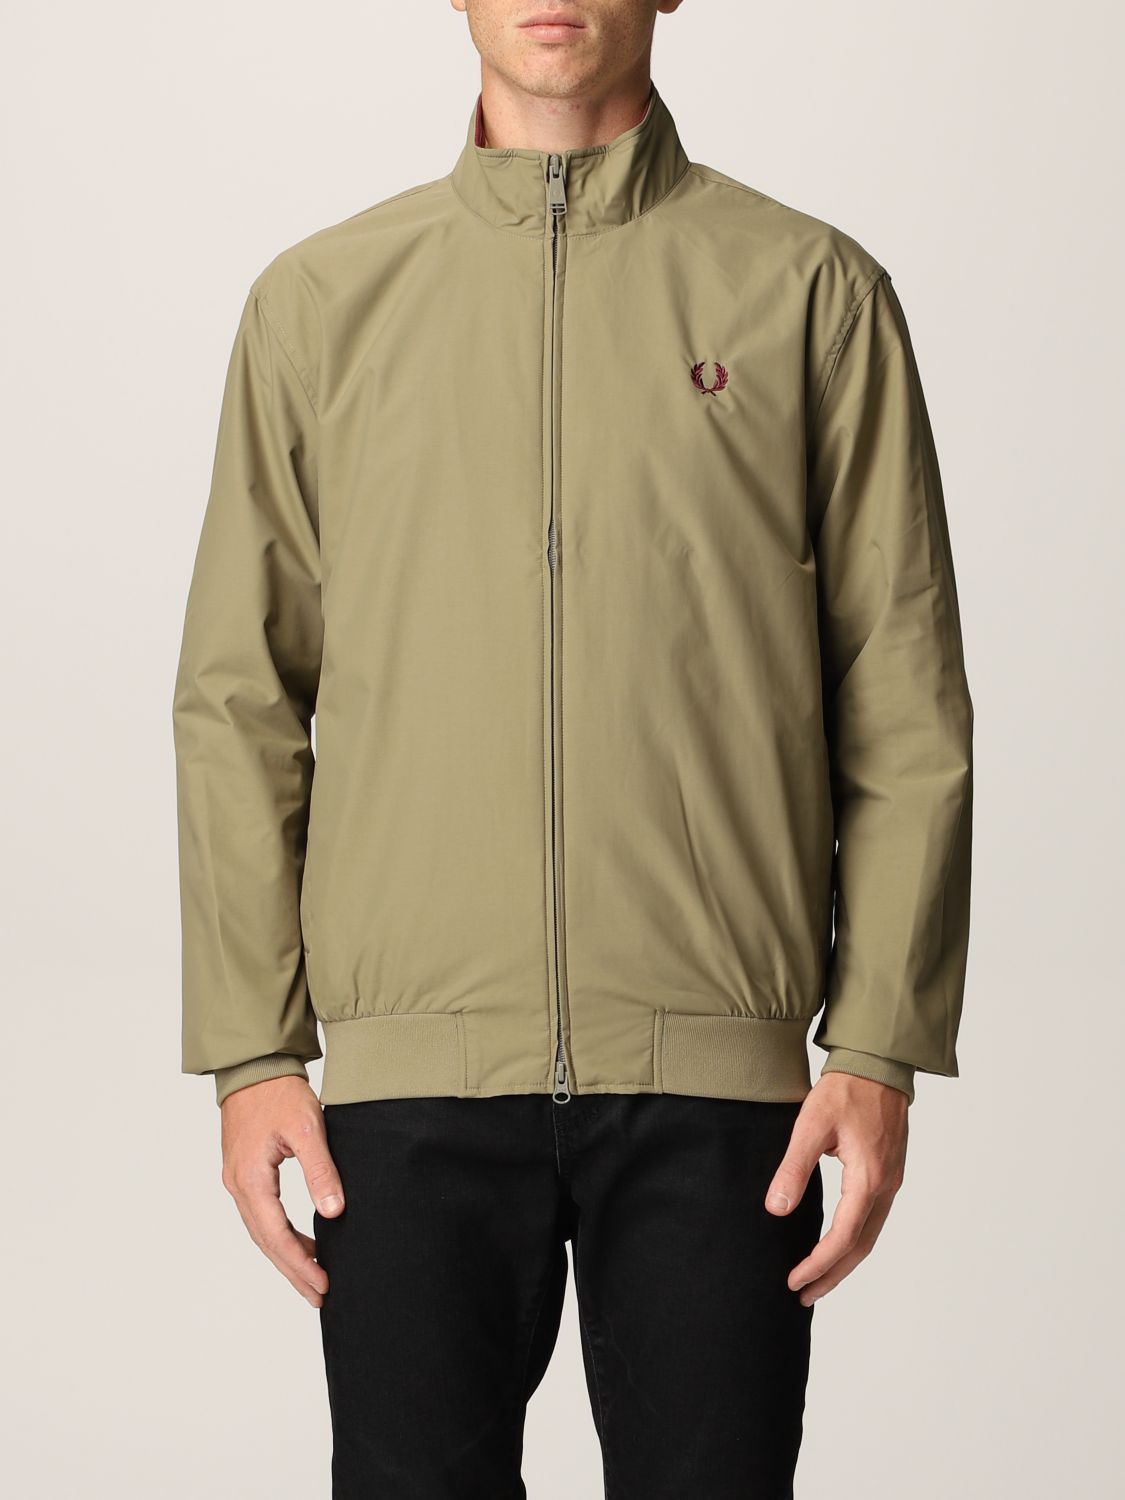 achterzijde stapel Ben depressief FRED PERRY: Brentham jacket in nylon twill | Jacket Fred Perry Men Sand |  Jacket Fred Perry J2660 GIGLIO.COM